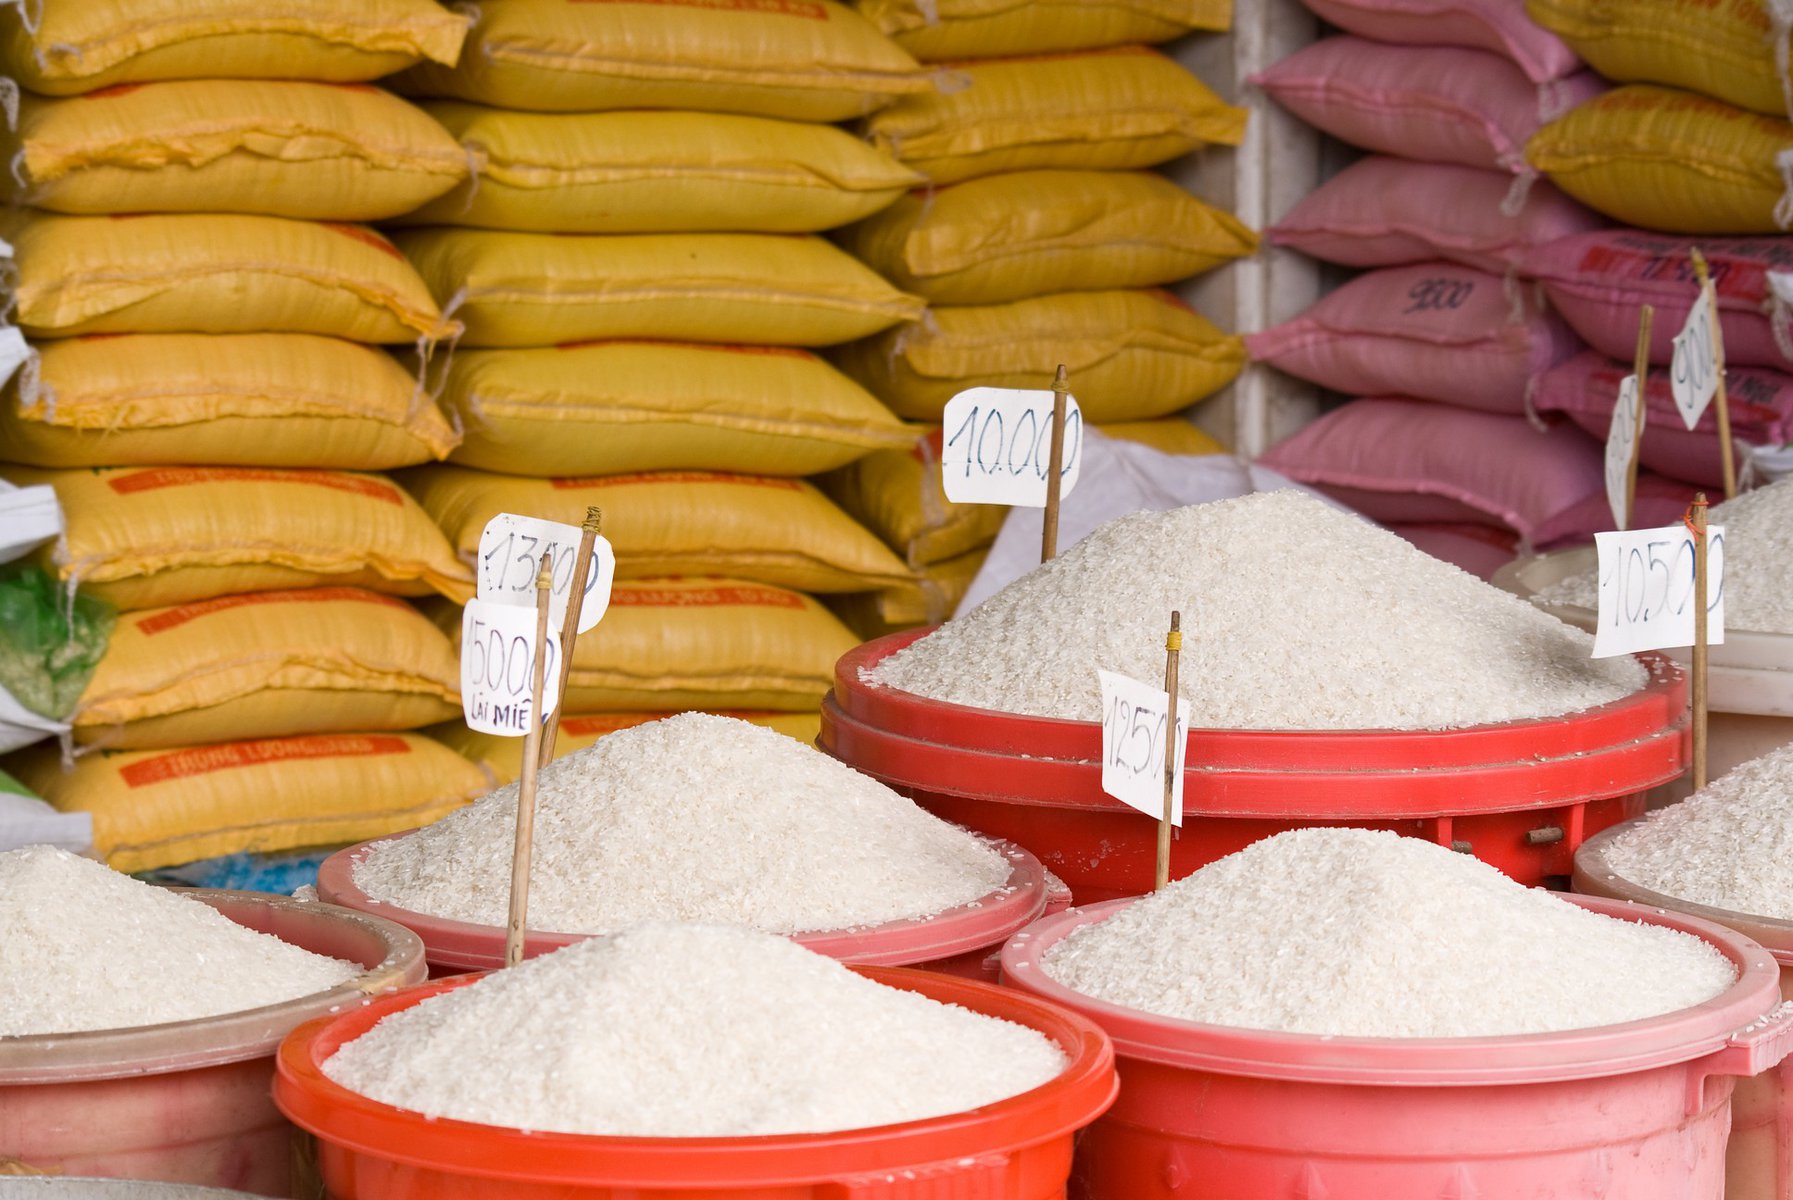 Different types of rice for sale in buckets.